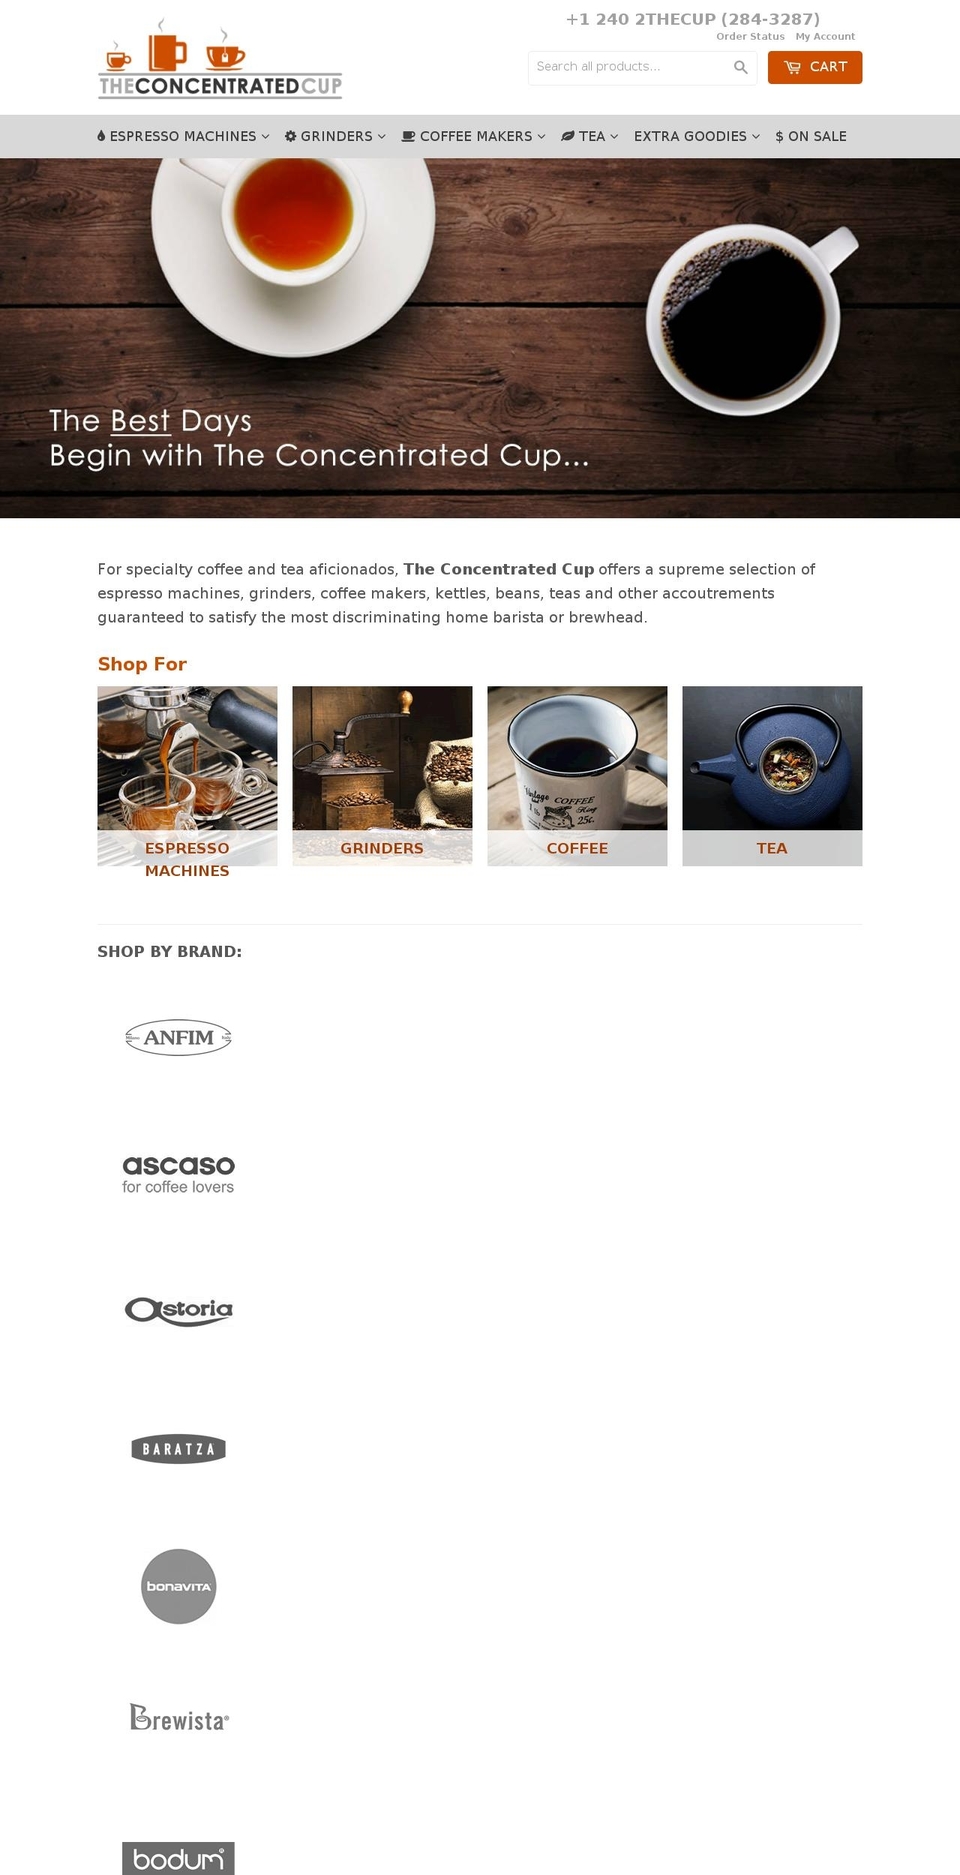 theconcentratedcup.com shopify website screenshot